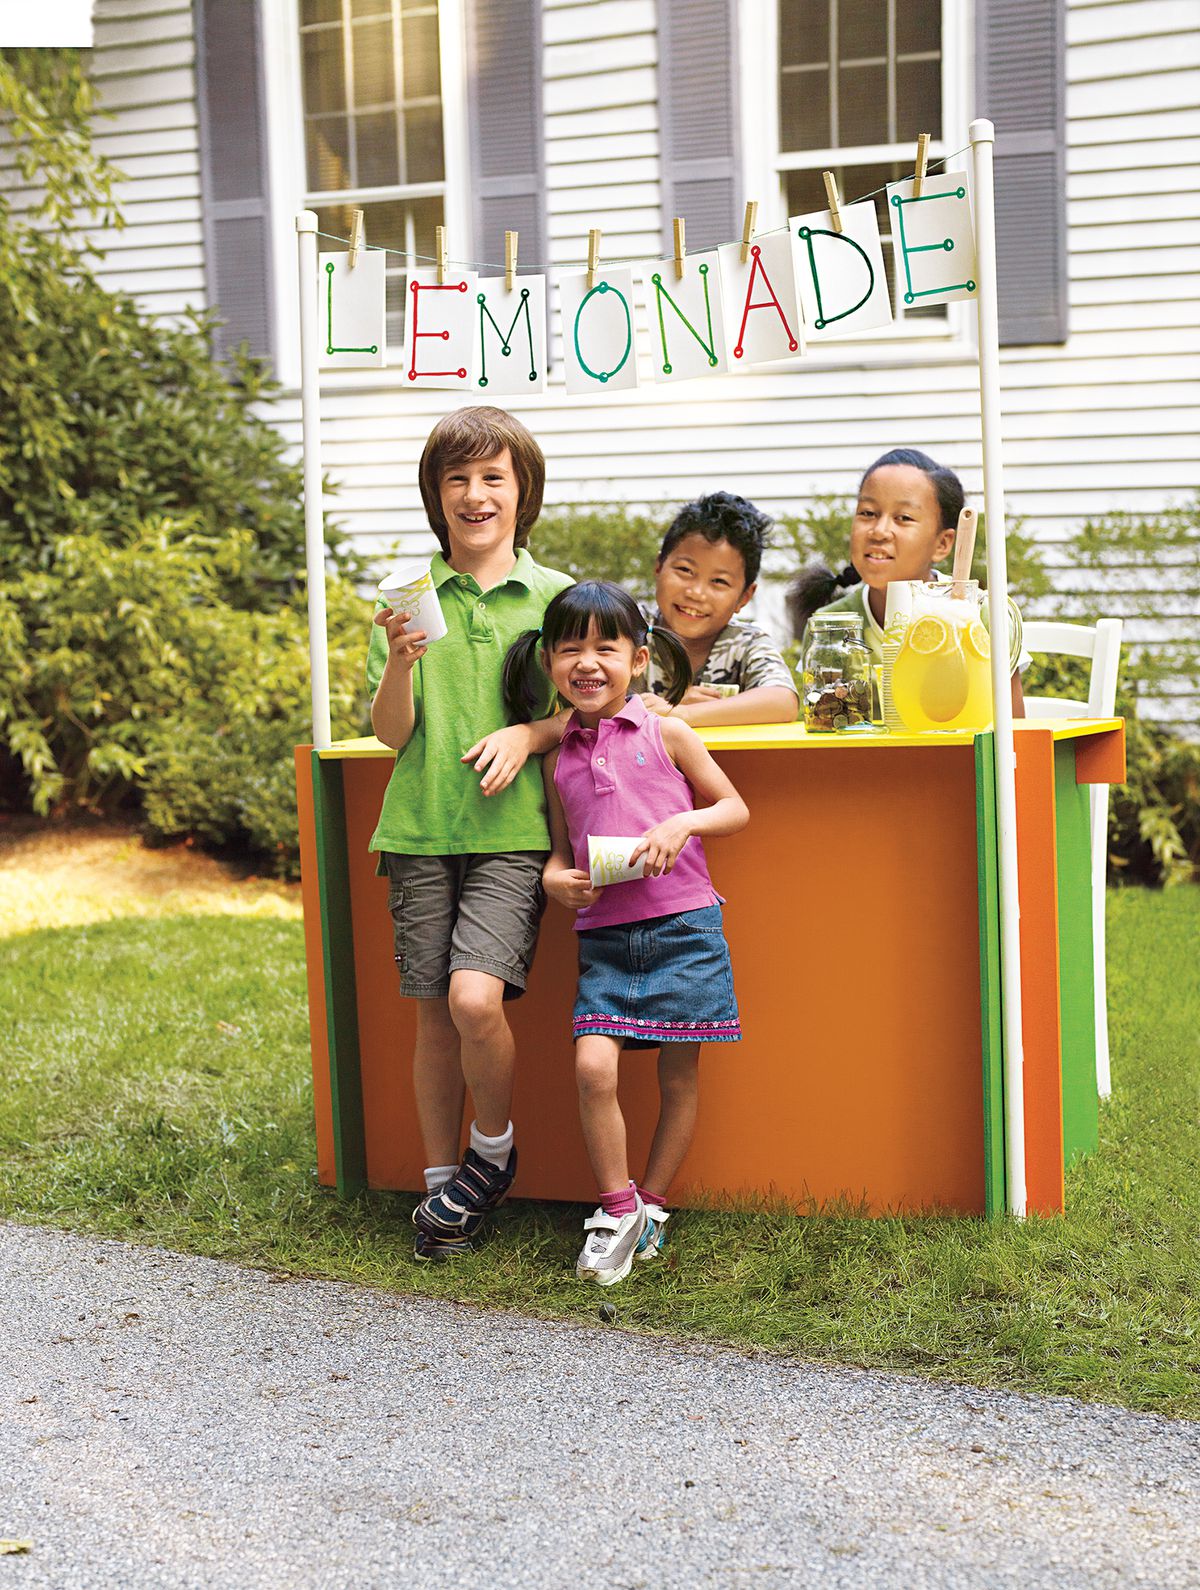 Family Project: Lemonade stand